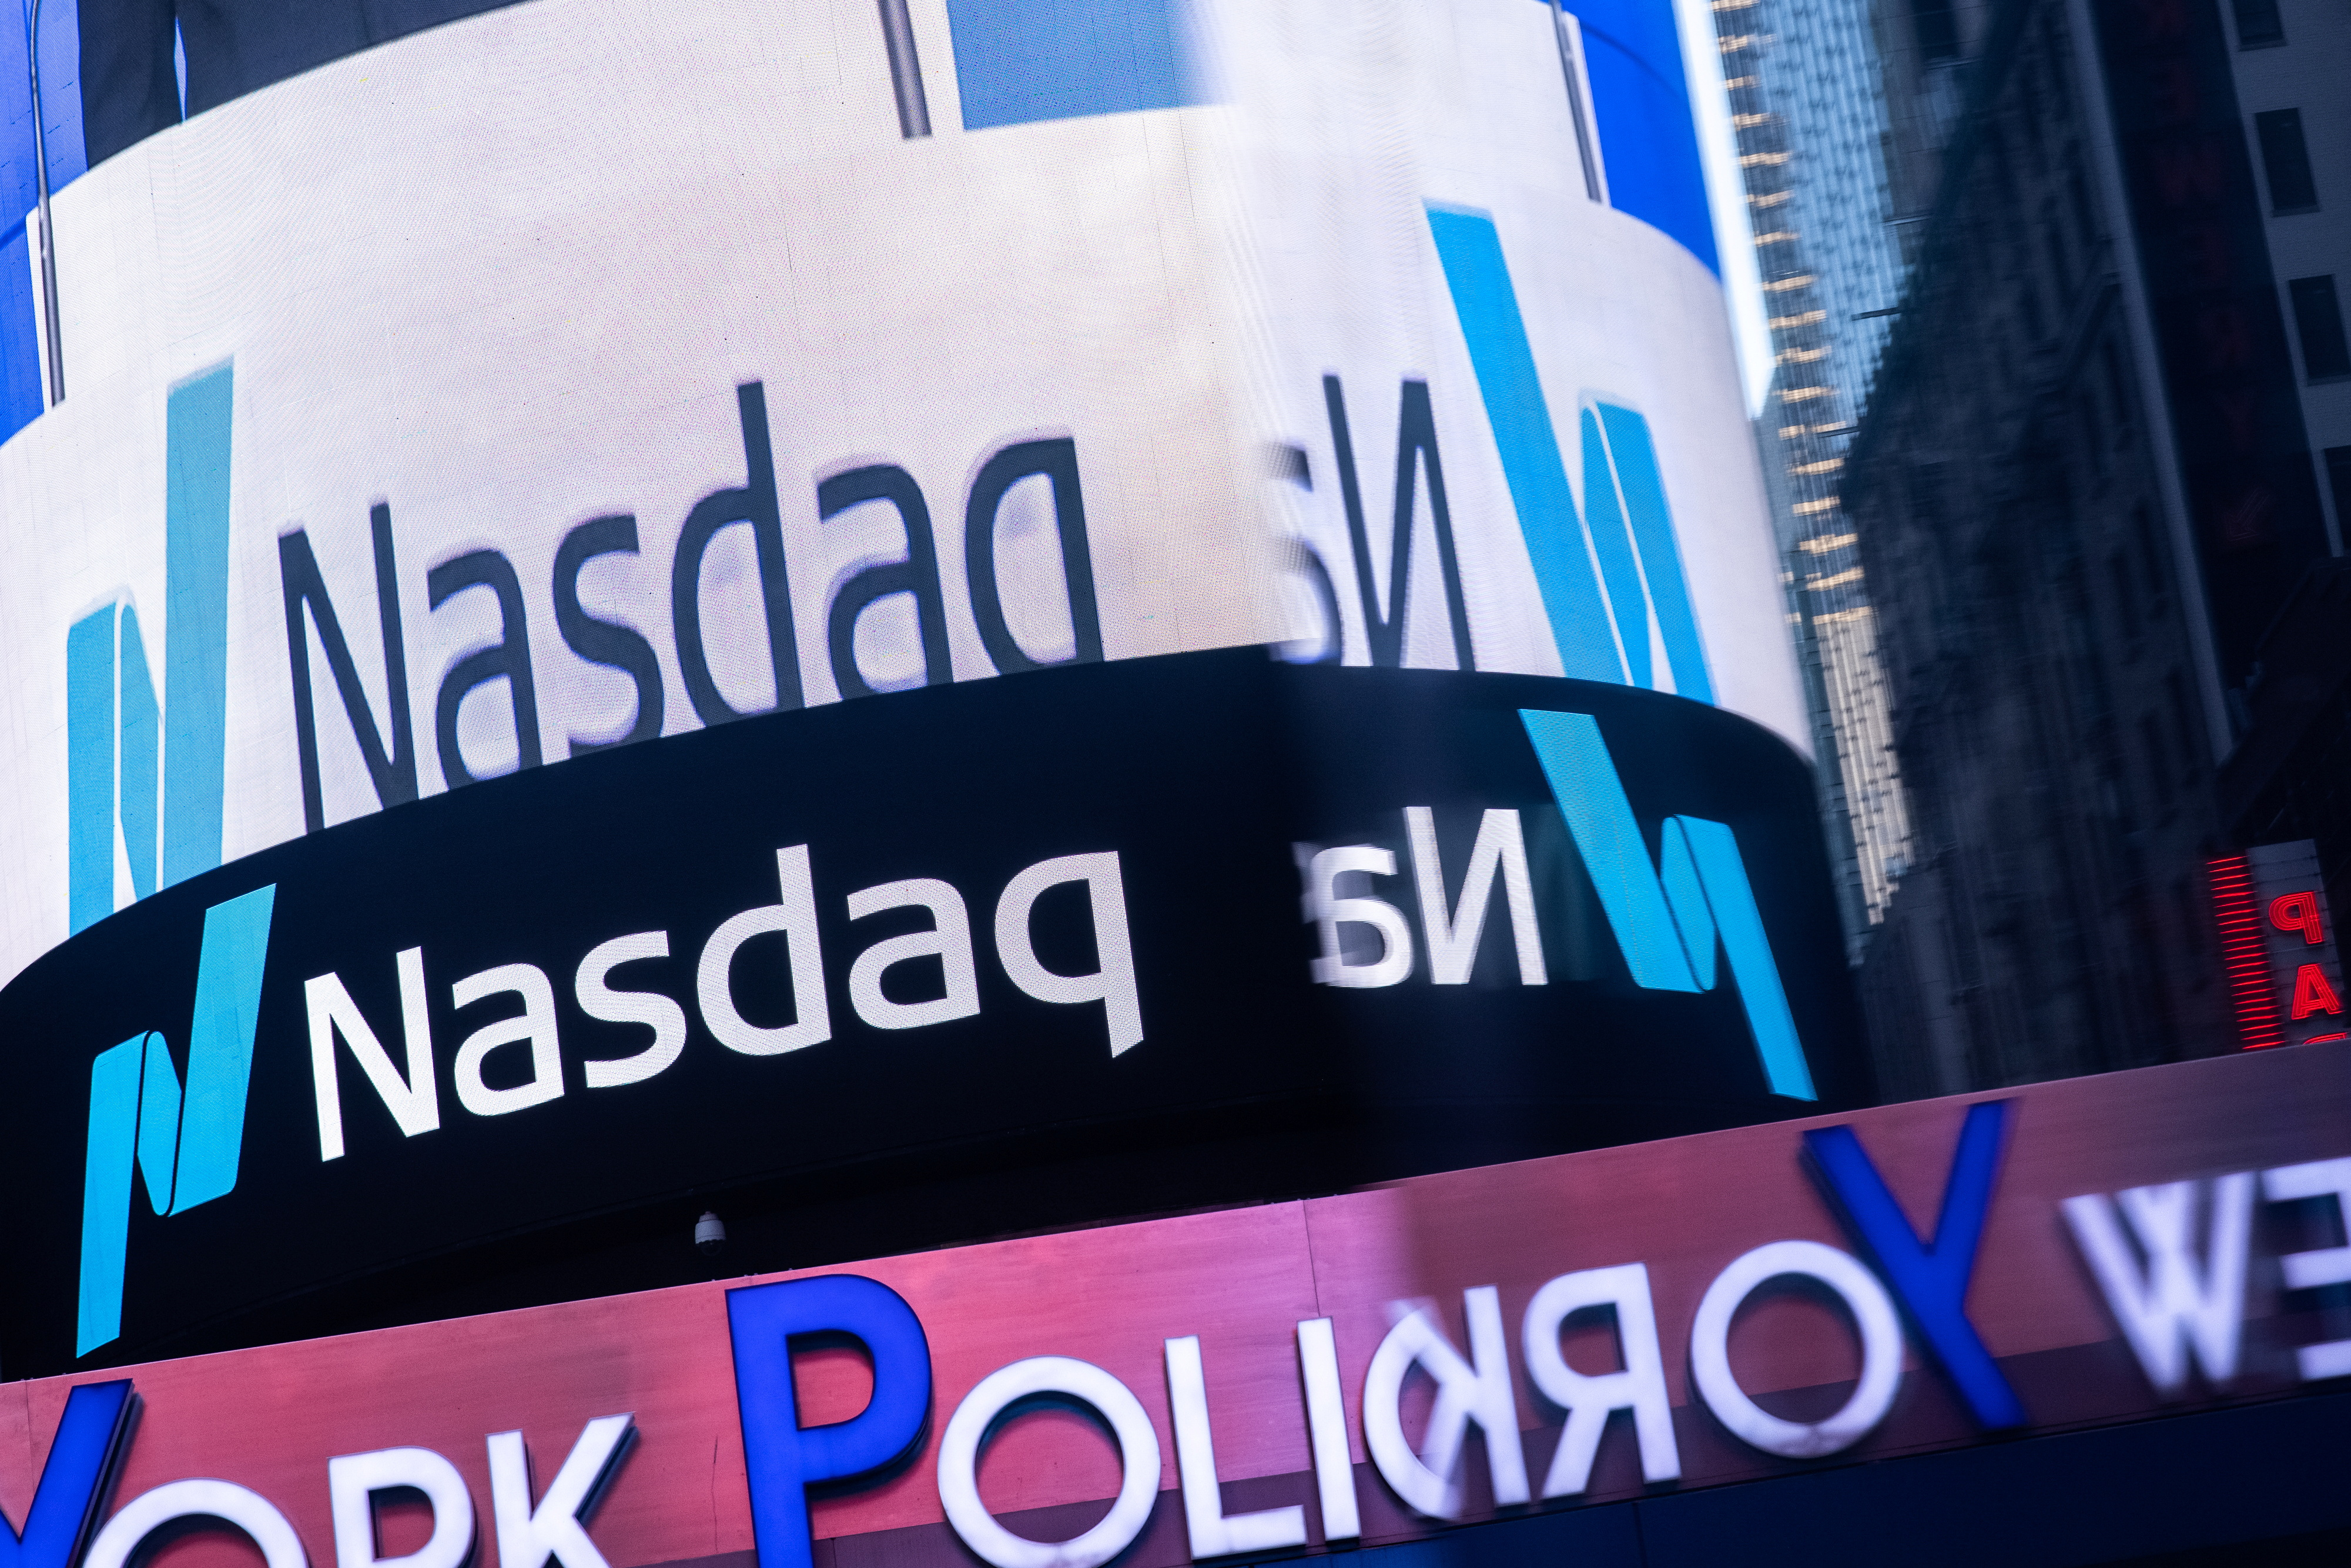 The Nasdaq logo is displayed at the Nasdaq Market site in Times Square in New York